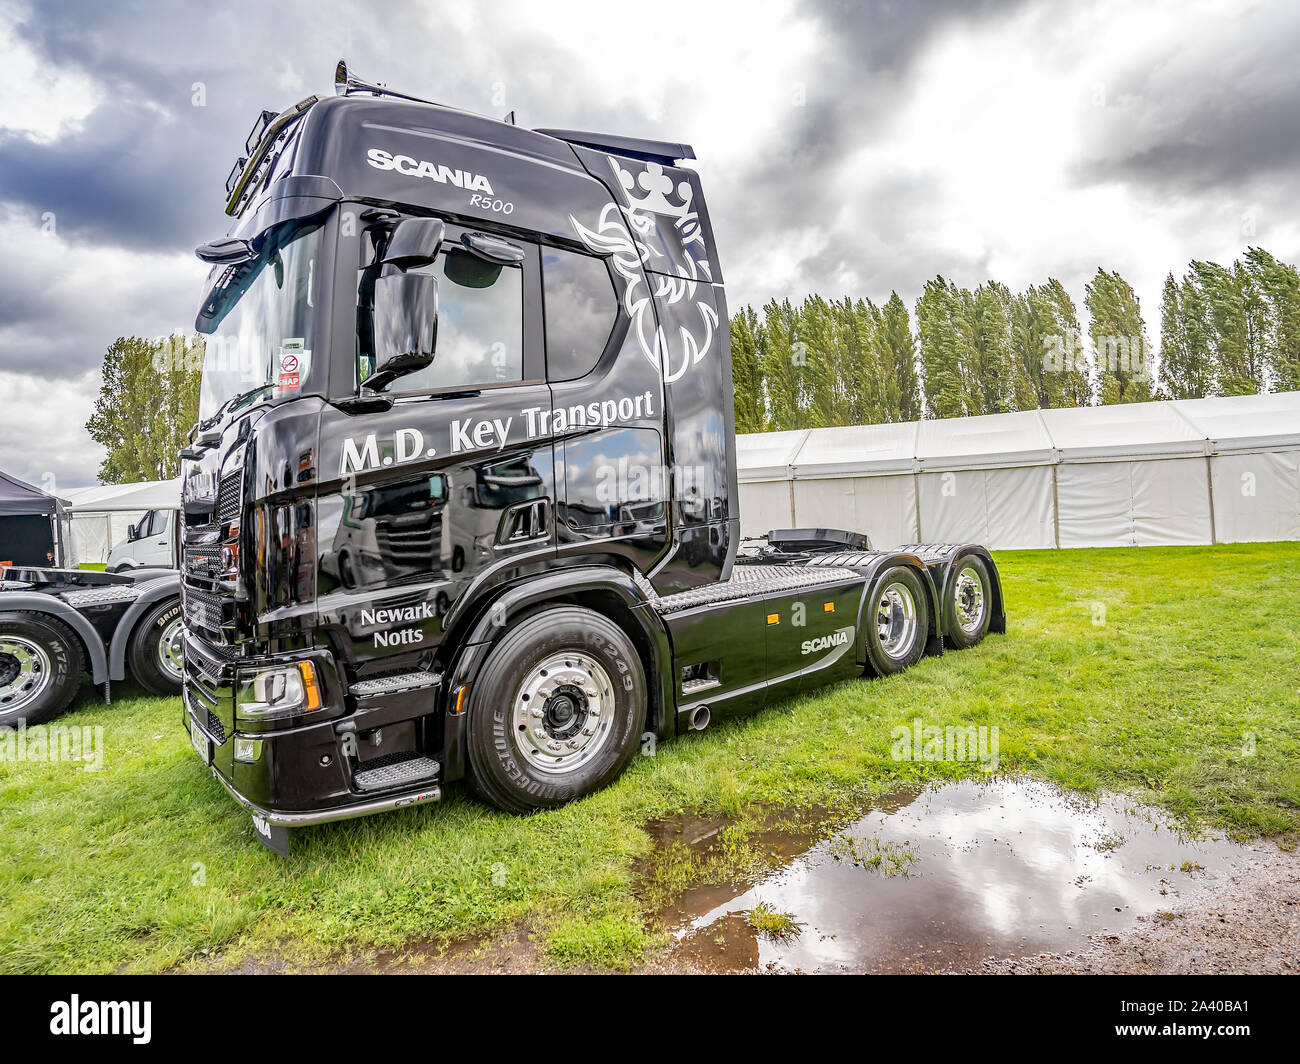 Scania R500 HGV cab owned by MD Key Transport on show at the annual Newark Truckfest Stock Photo